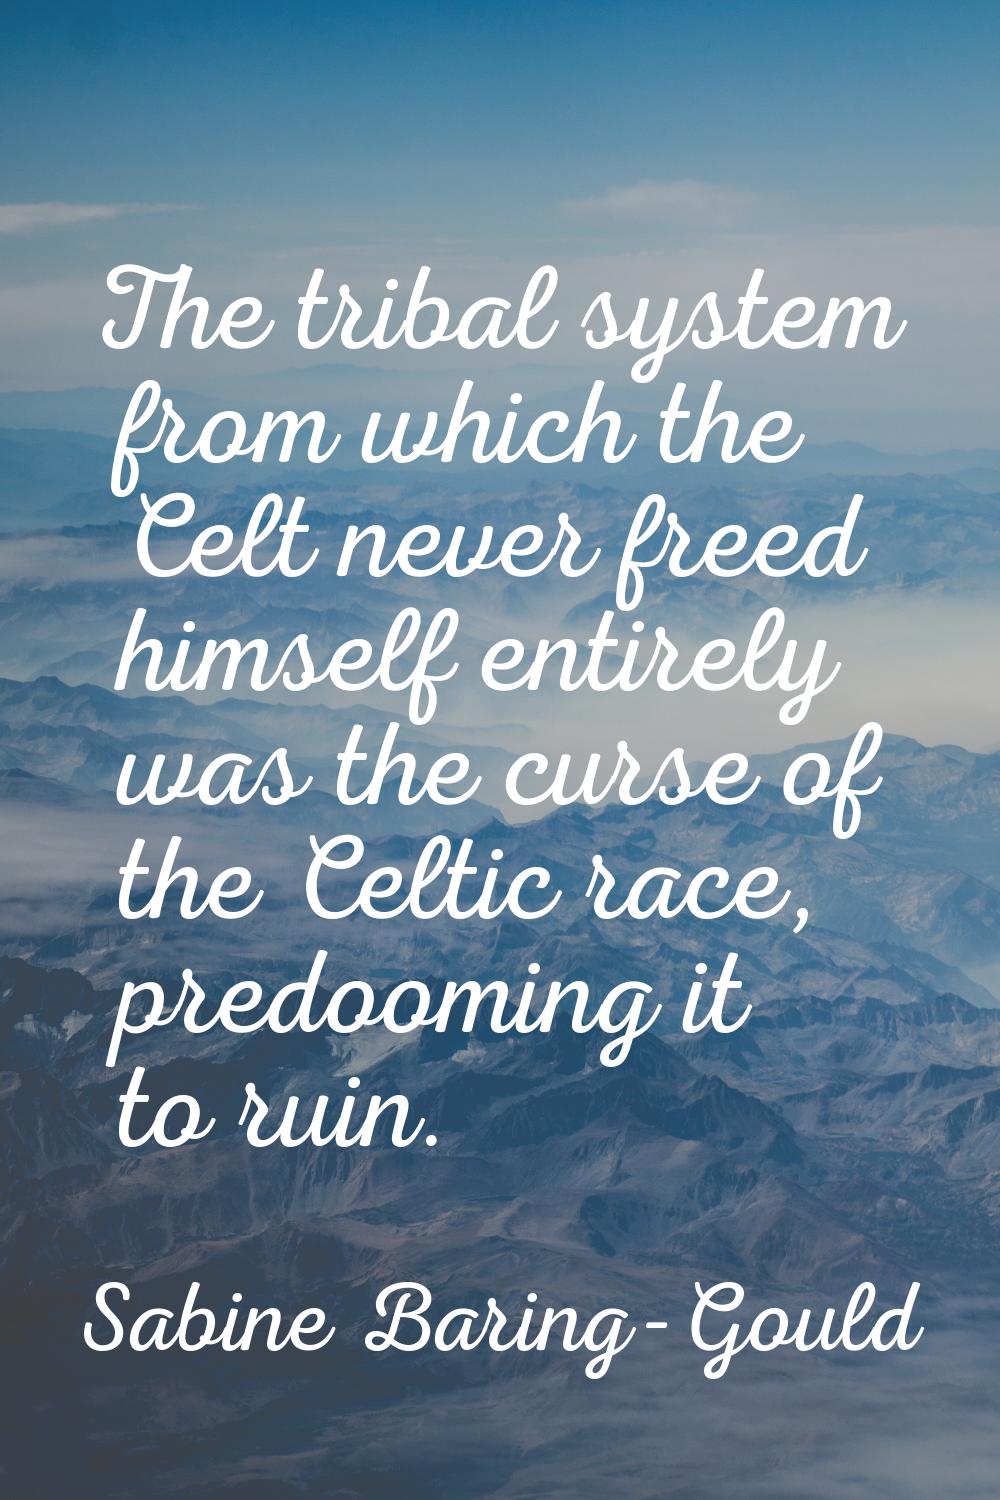 The tribal system from which the Celt never freed himself entirely was the curse of the Celtic race